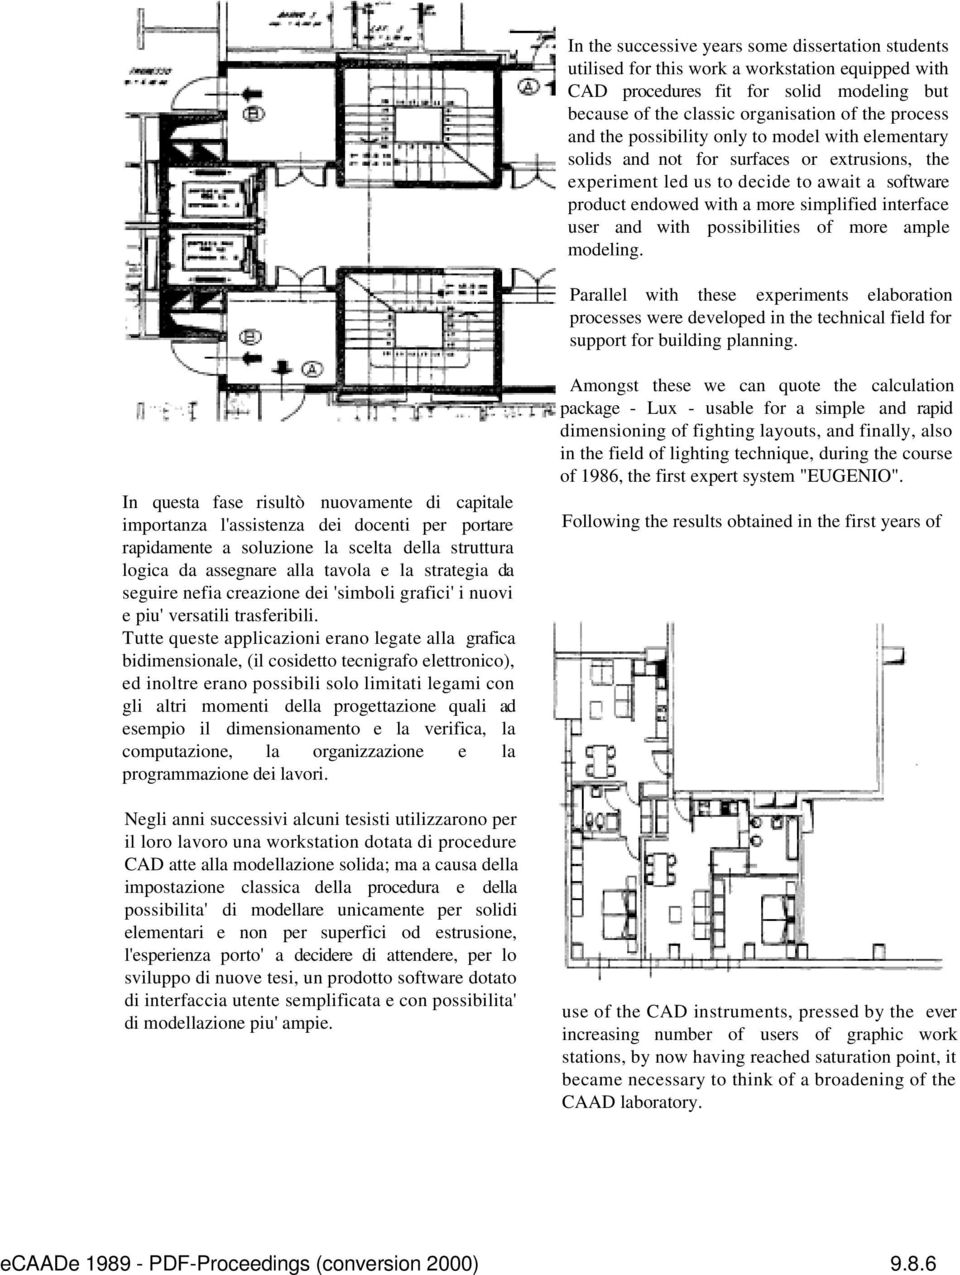 with possibilities of more ample modeling. Parallel with these experiments elaboration processes were developed in the technical field for support for building planning.